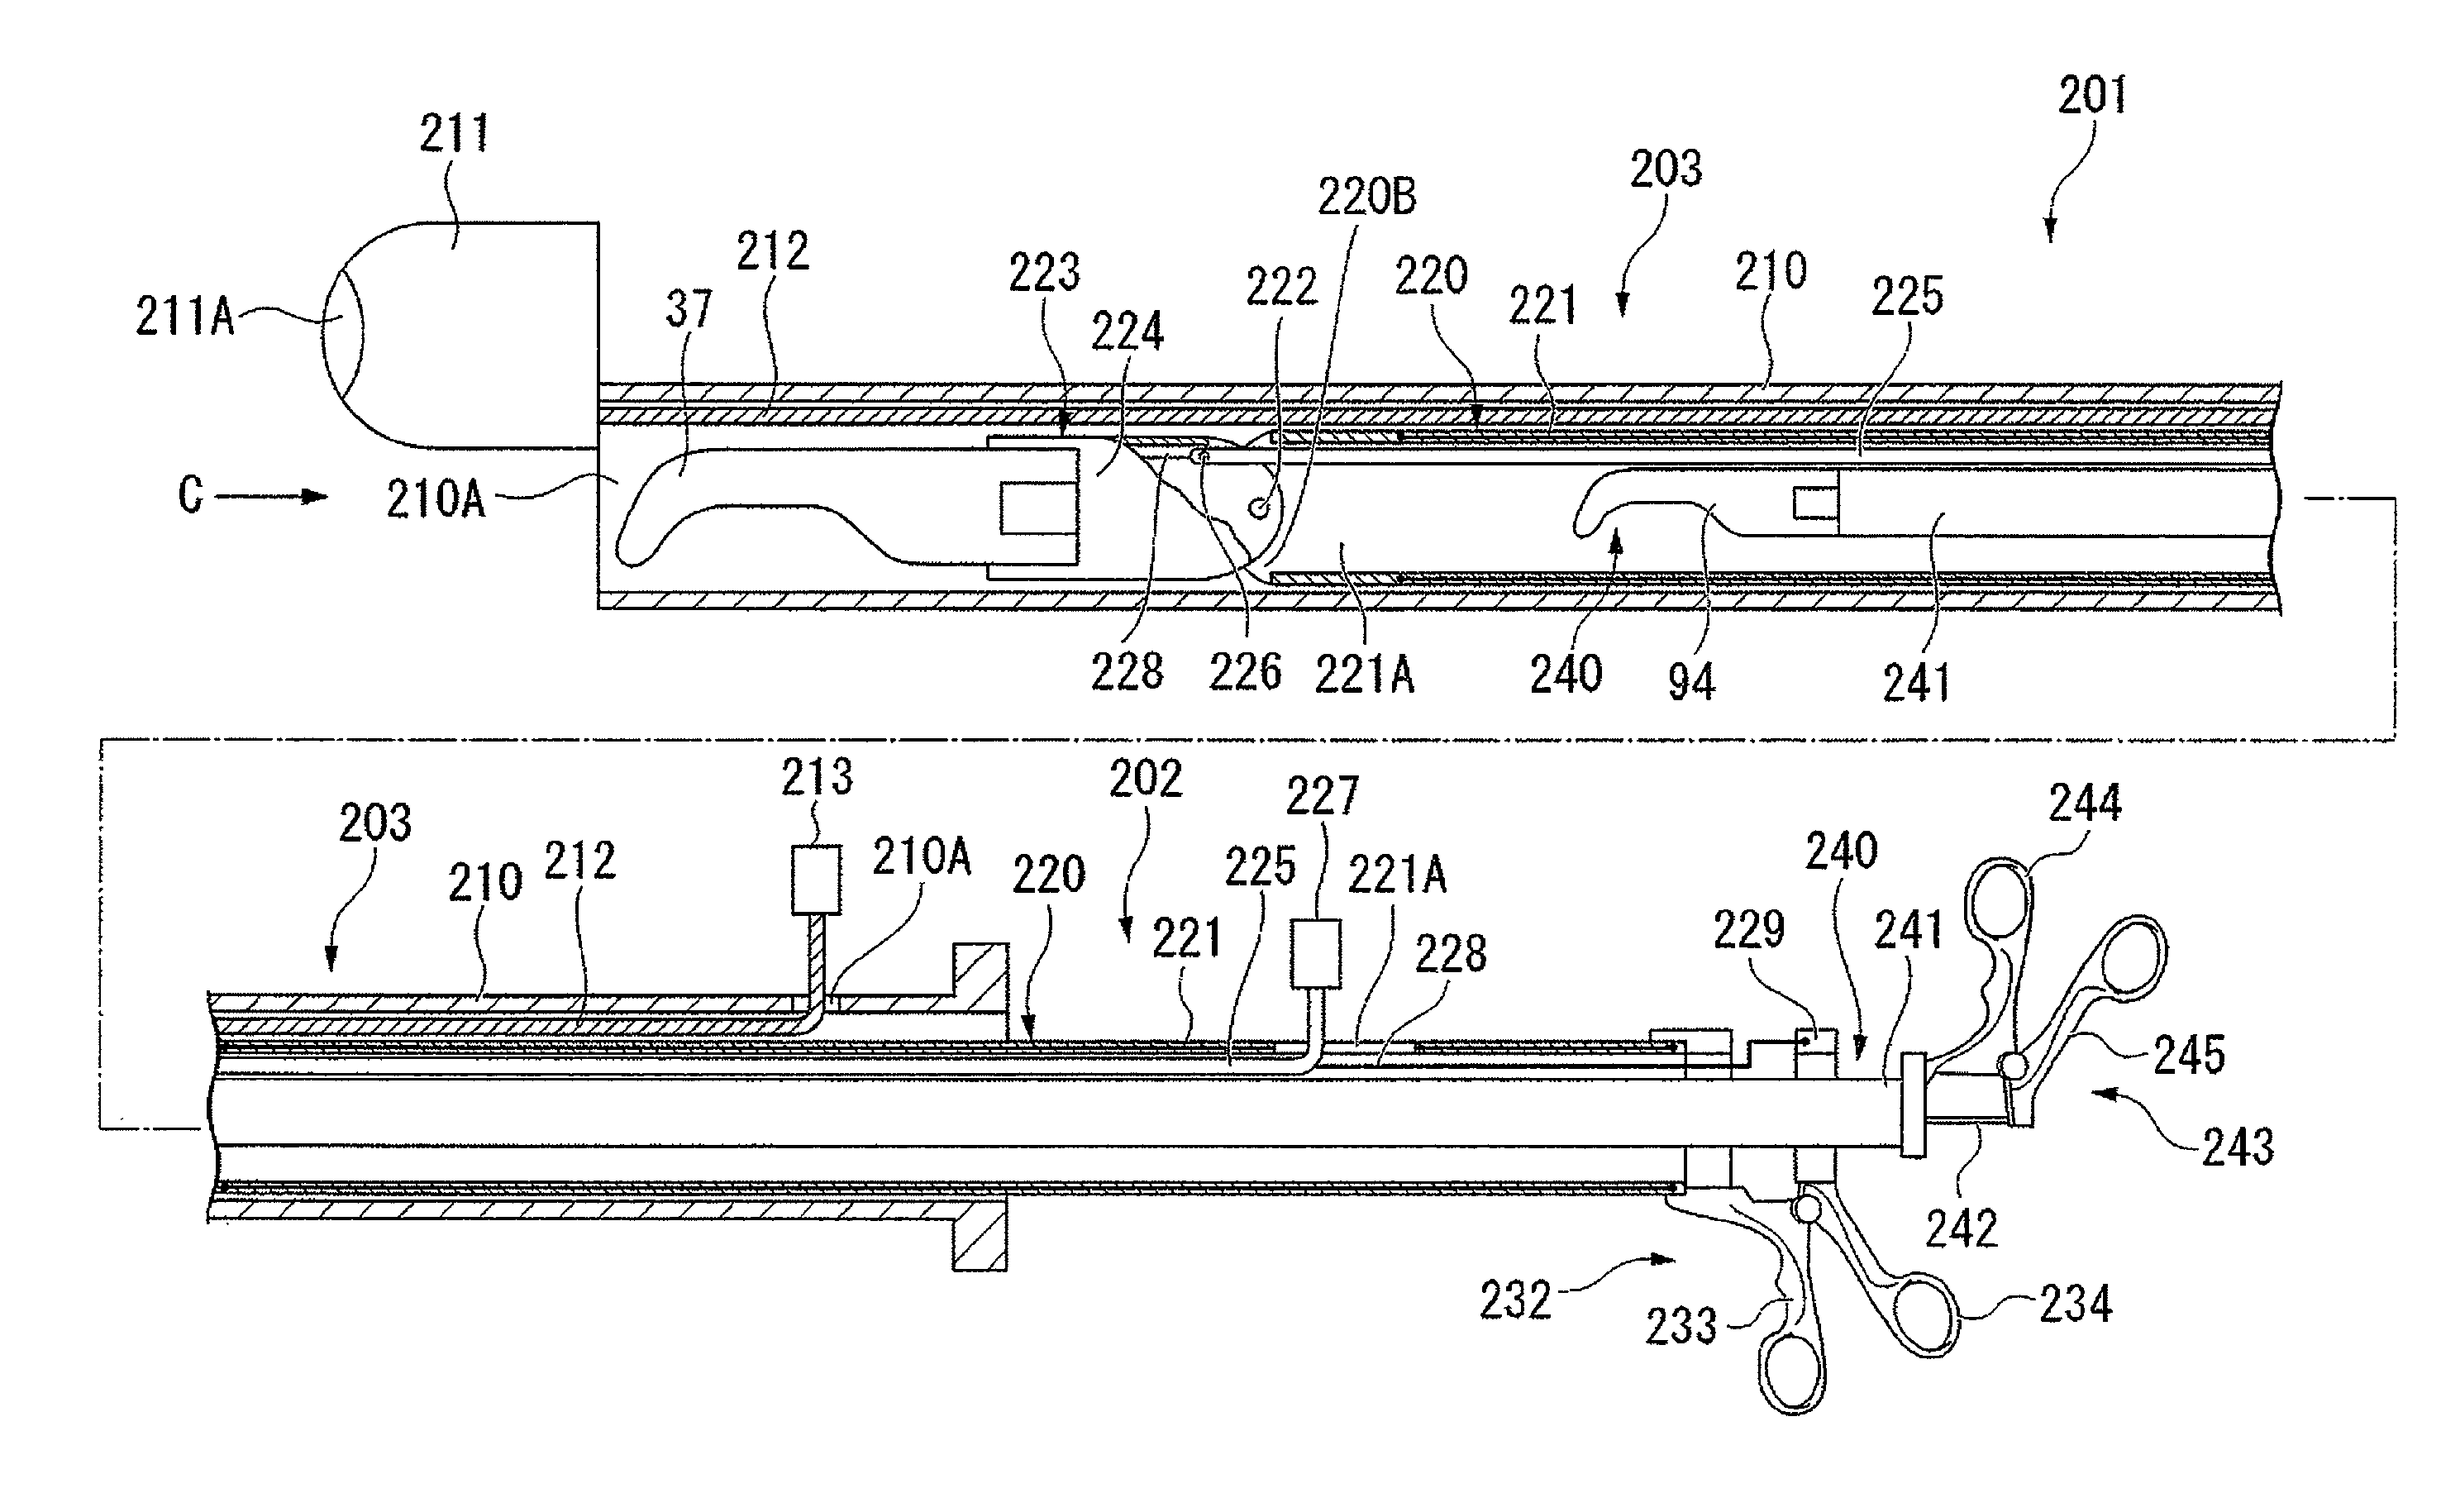 Surgical treatment apparatus